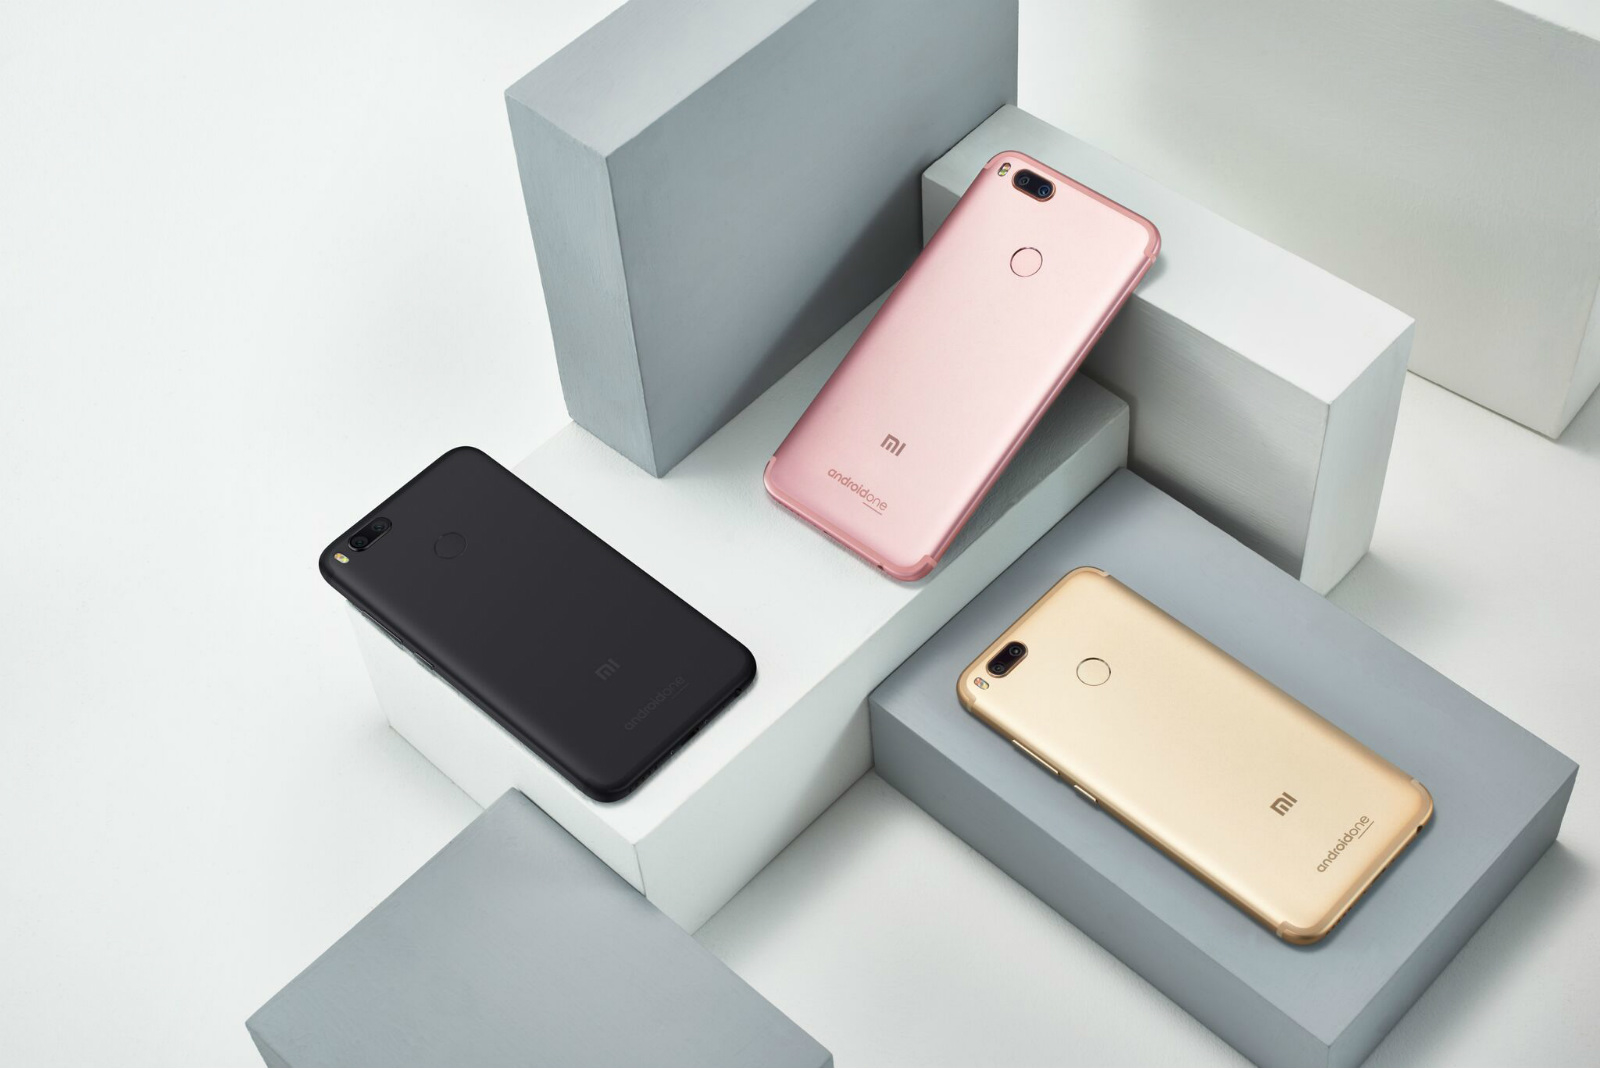 xiaomi android one in market from sept 12 xiaomi Mi a1 in flipkart today